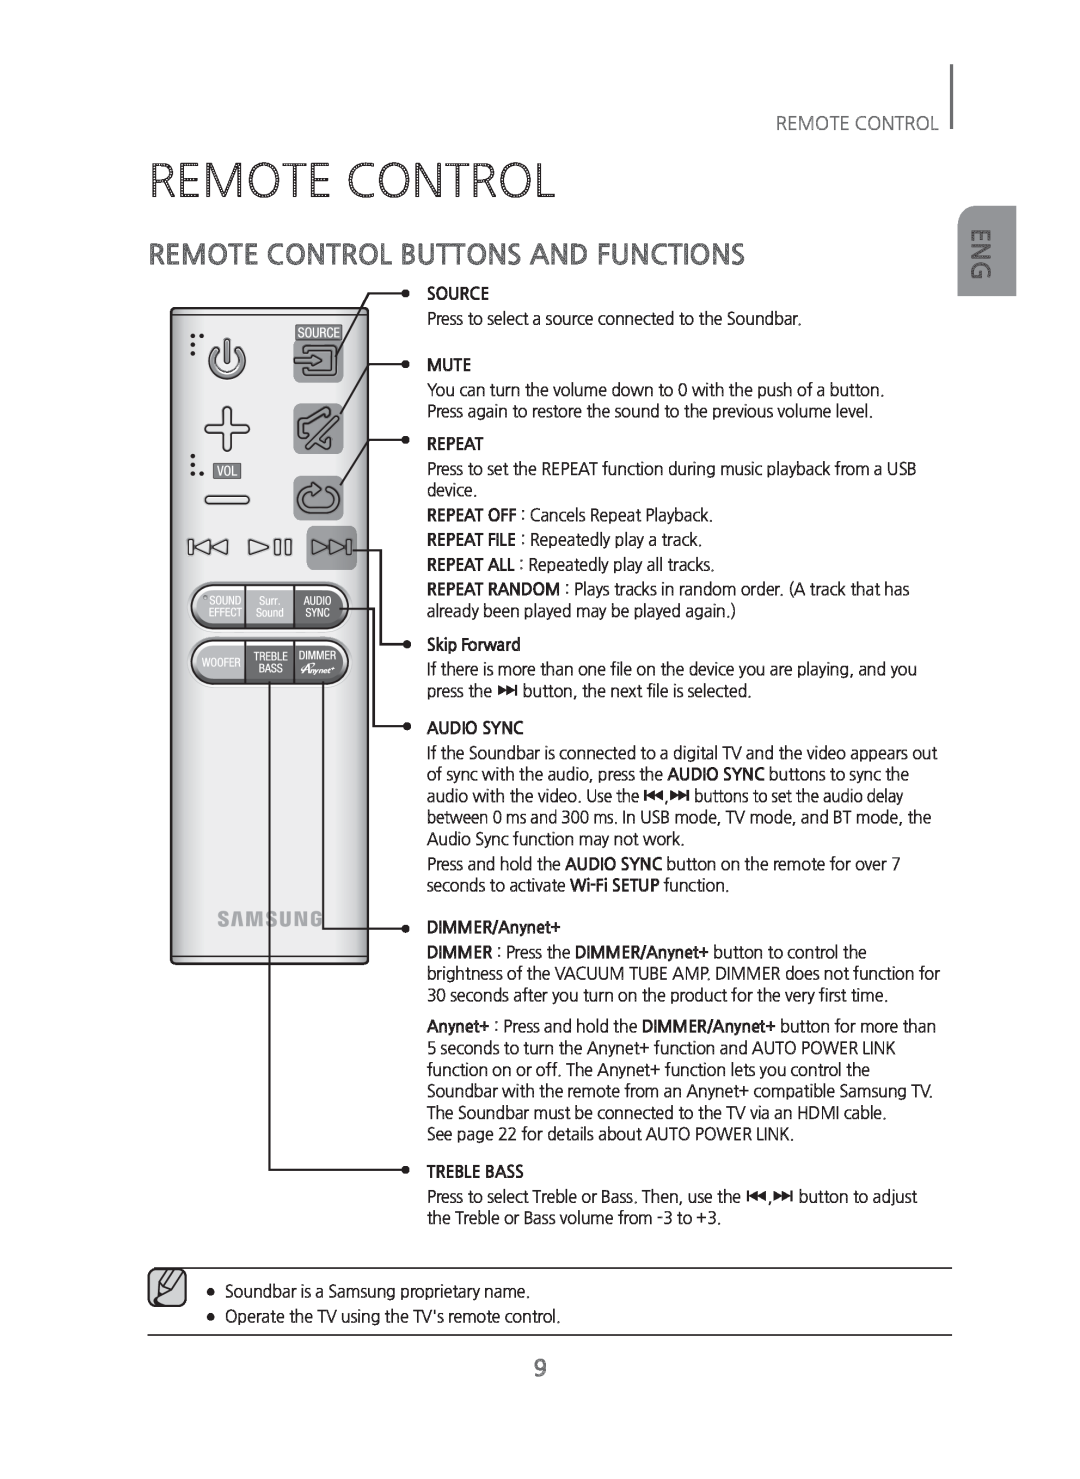 Samsung HW-H750/ZA manual Remote Control Buttons And Functions 